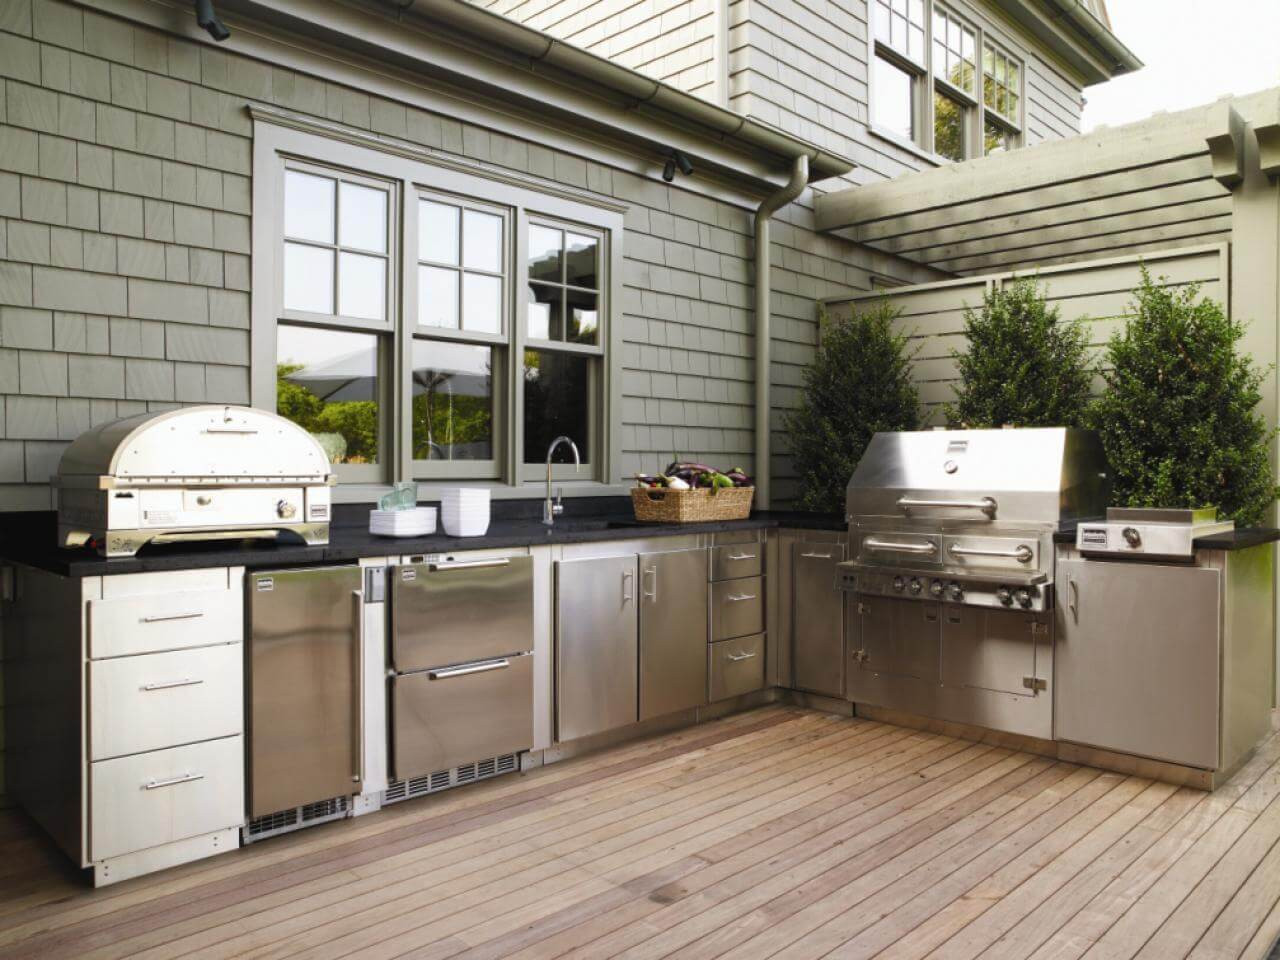 Outdoor Kitchen Cabinet Ideas
 How to Build Outdoor Kitchen Cabinets AllstateLogHomes